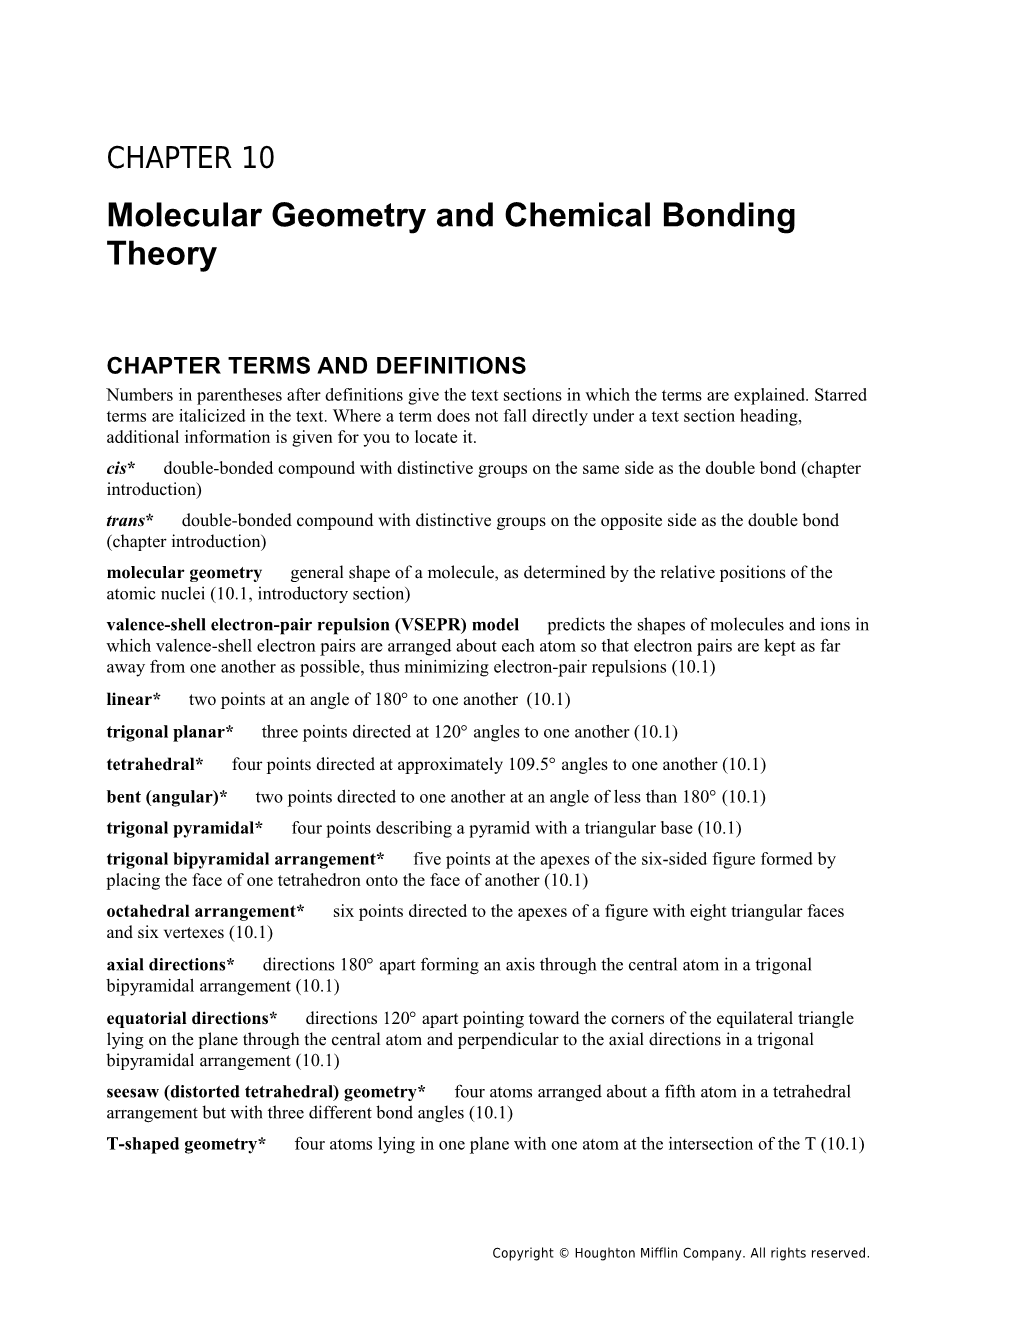 Chapter 10: Molecular Geometry and Chemical Bonding Theory 1